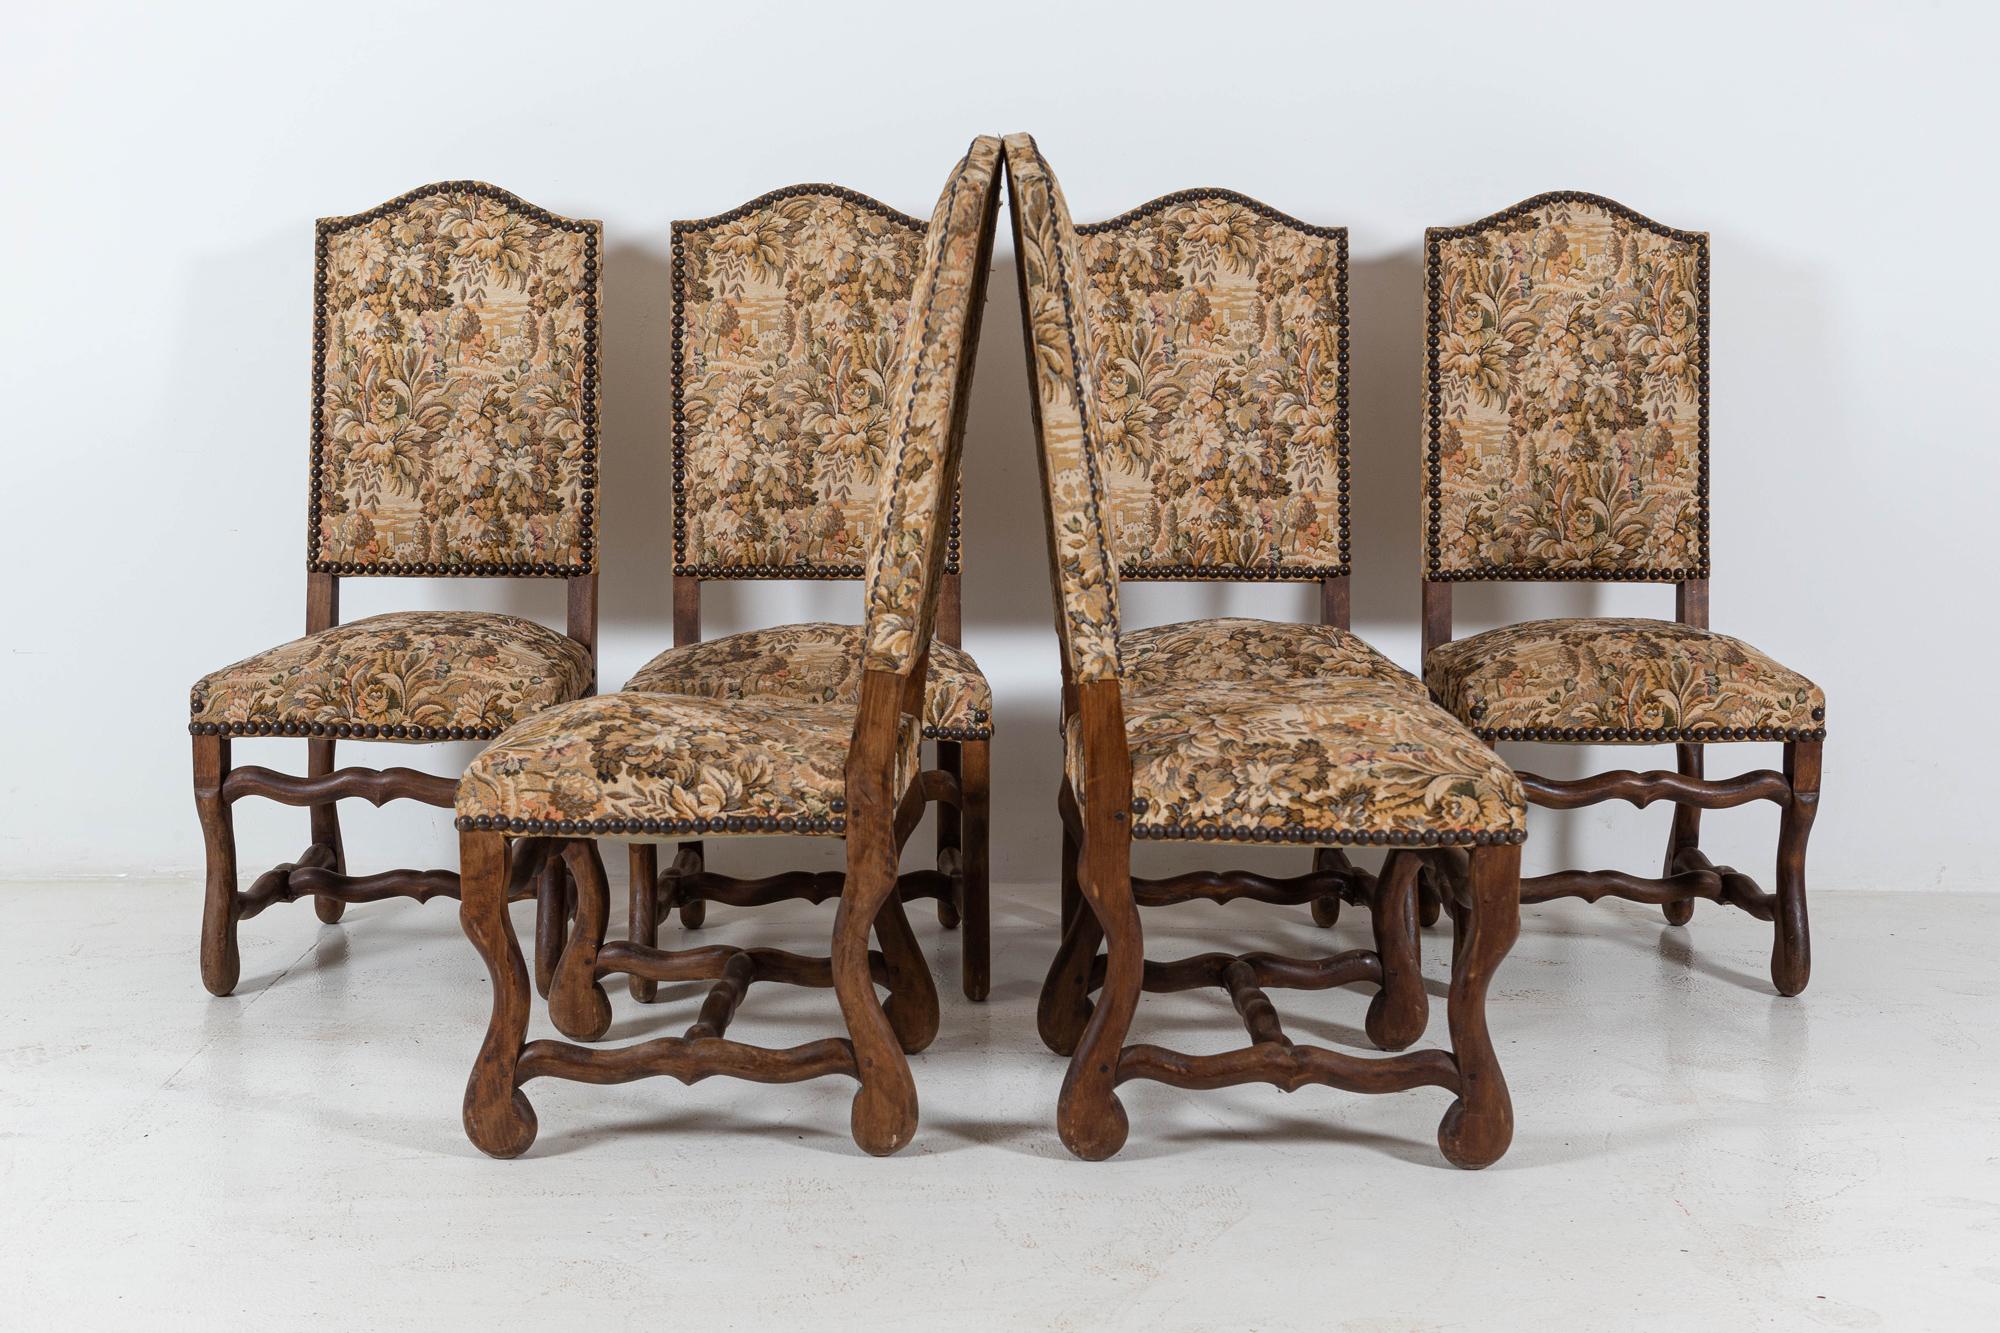 Circa 1900

Set of 6 Os De Mouton beech tapestry chairs in original sourced condition

Sourced from the South of France

Measures: W 48 x D 48 x H 113 cm.

 